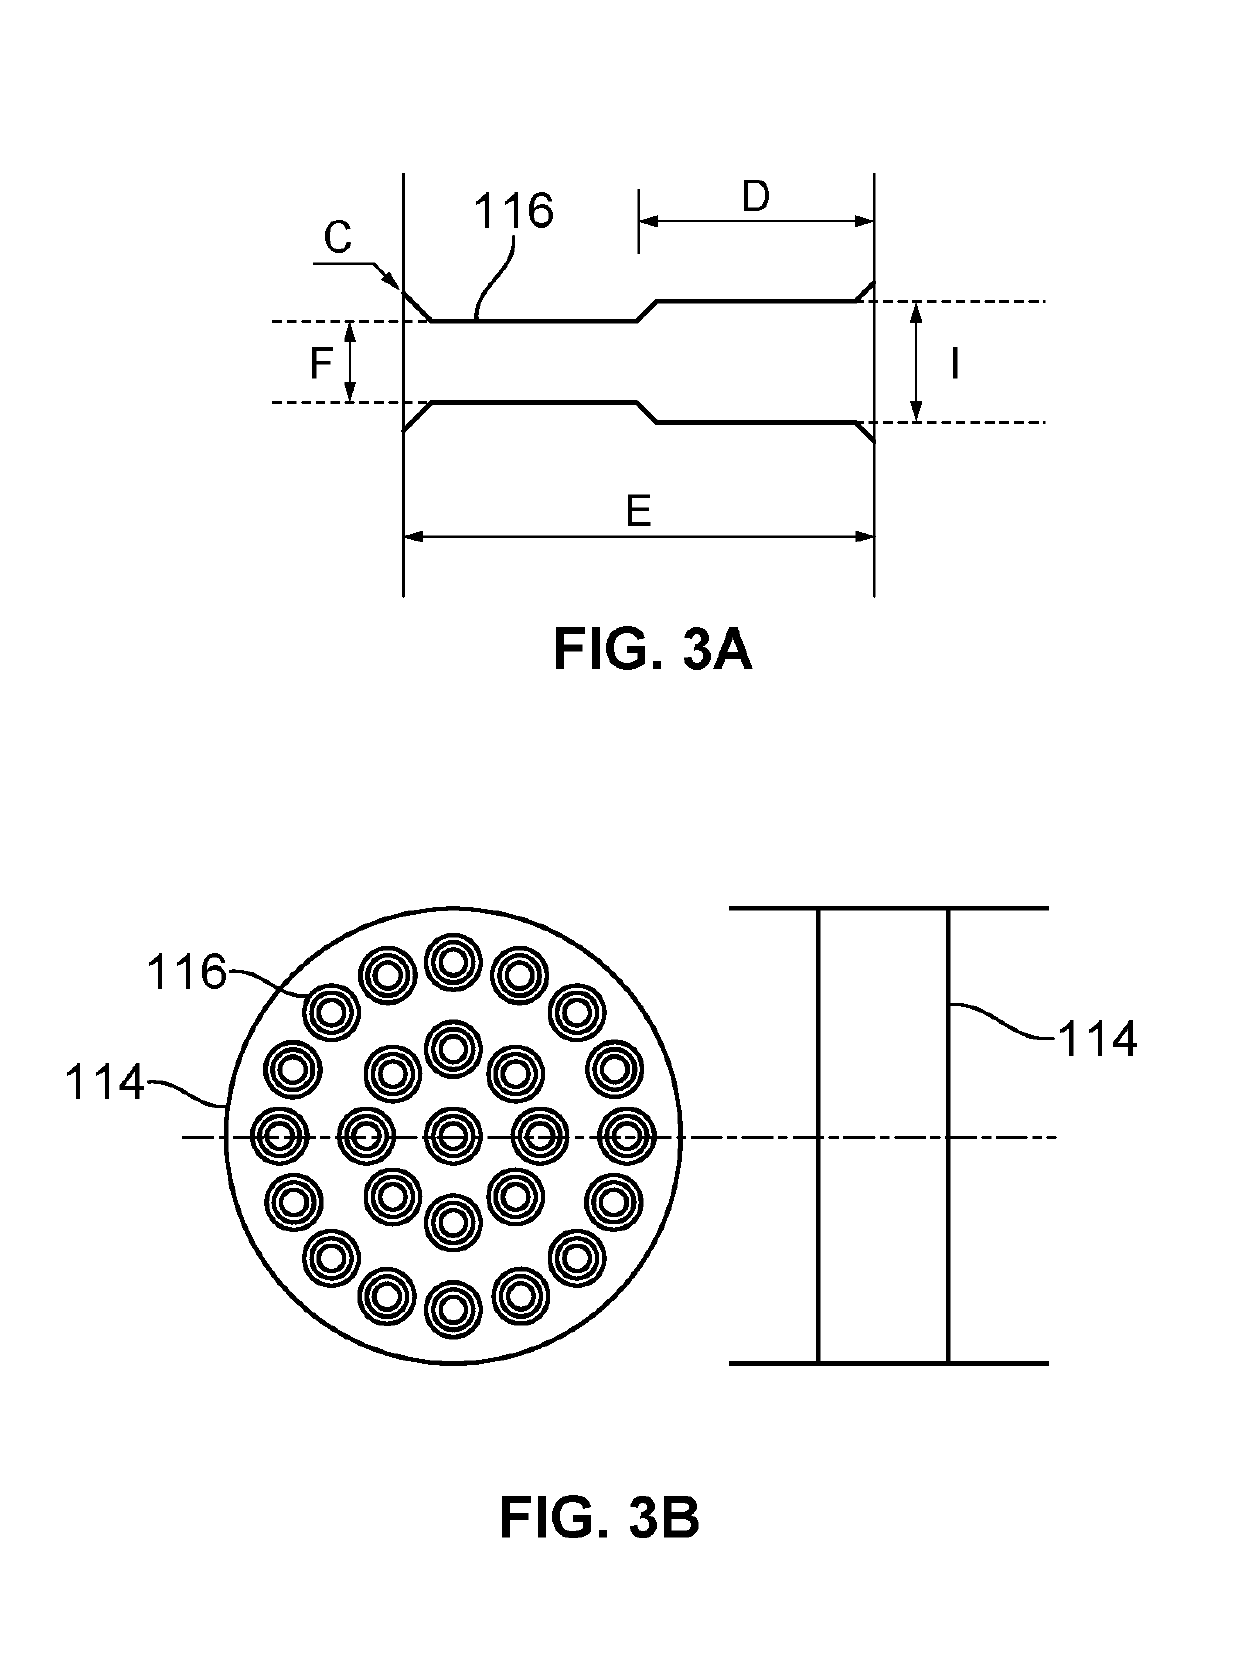 Device and method to create nano-particle fluid nucleation sites in situ